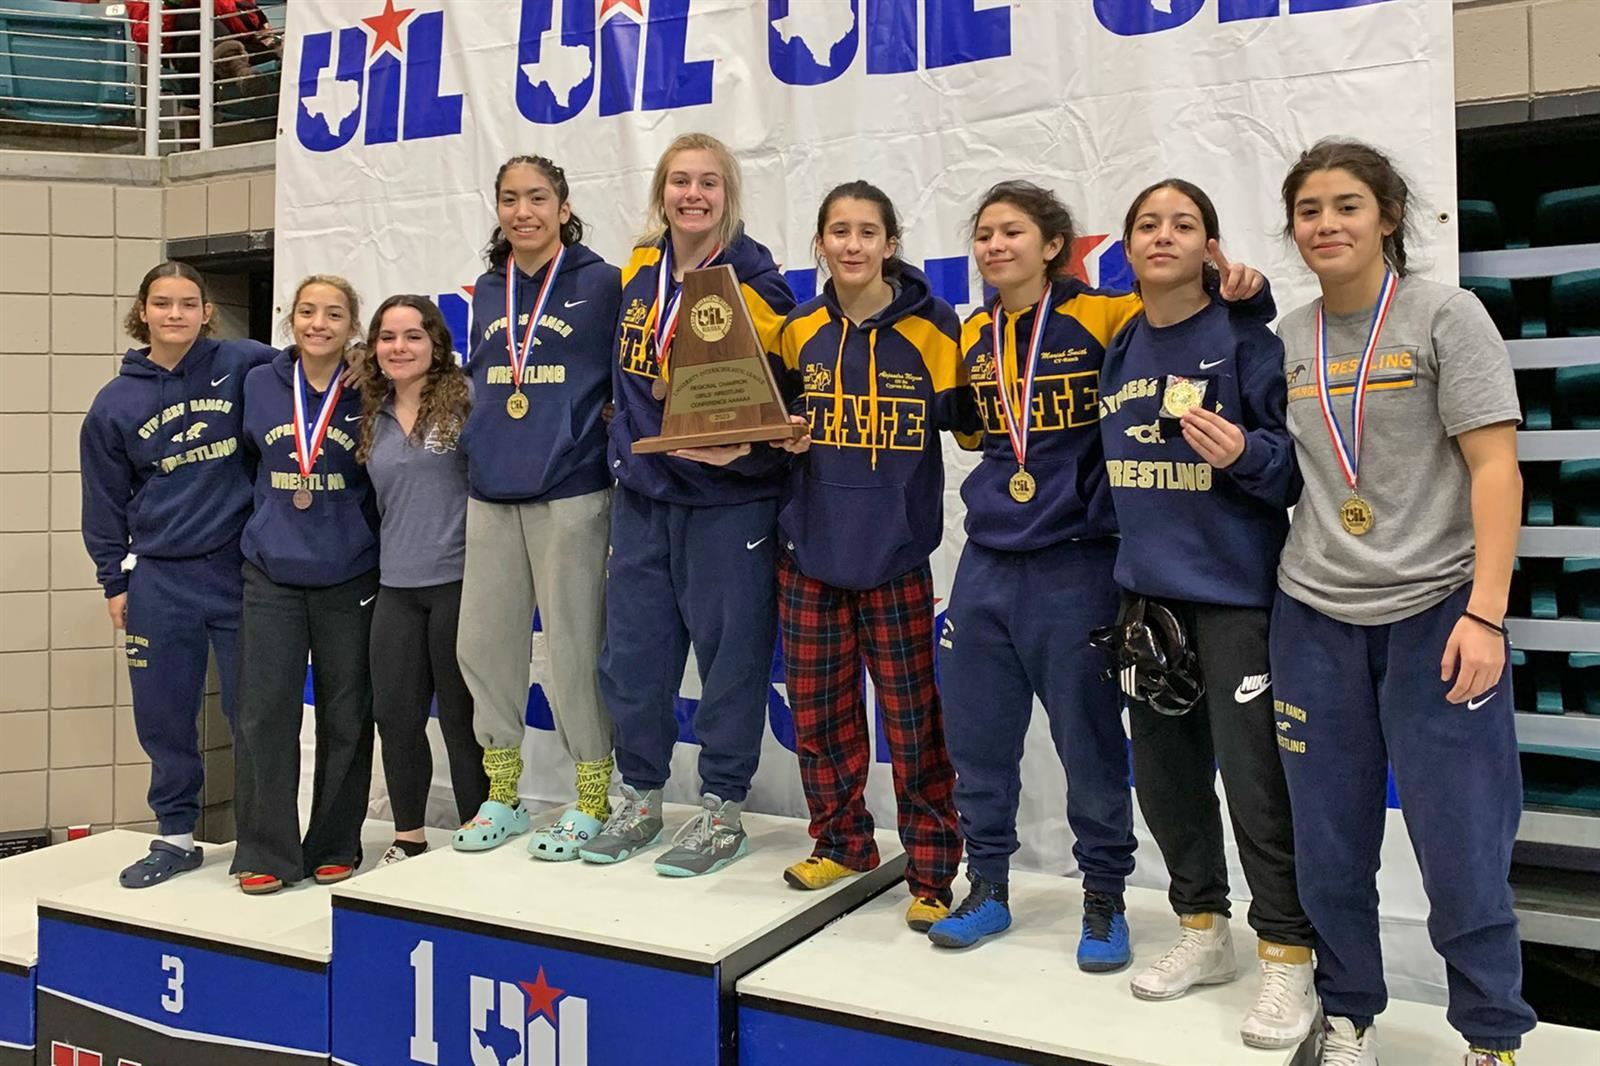 The Cypress Ranch High School girls’ wrestling team won the team title at the Region III-6A Wrestling Championships.